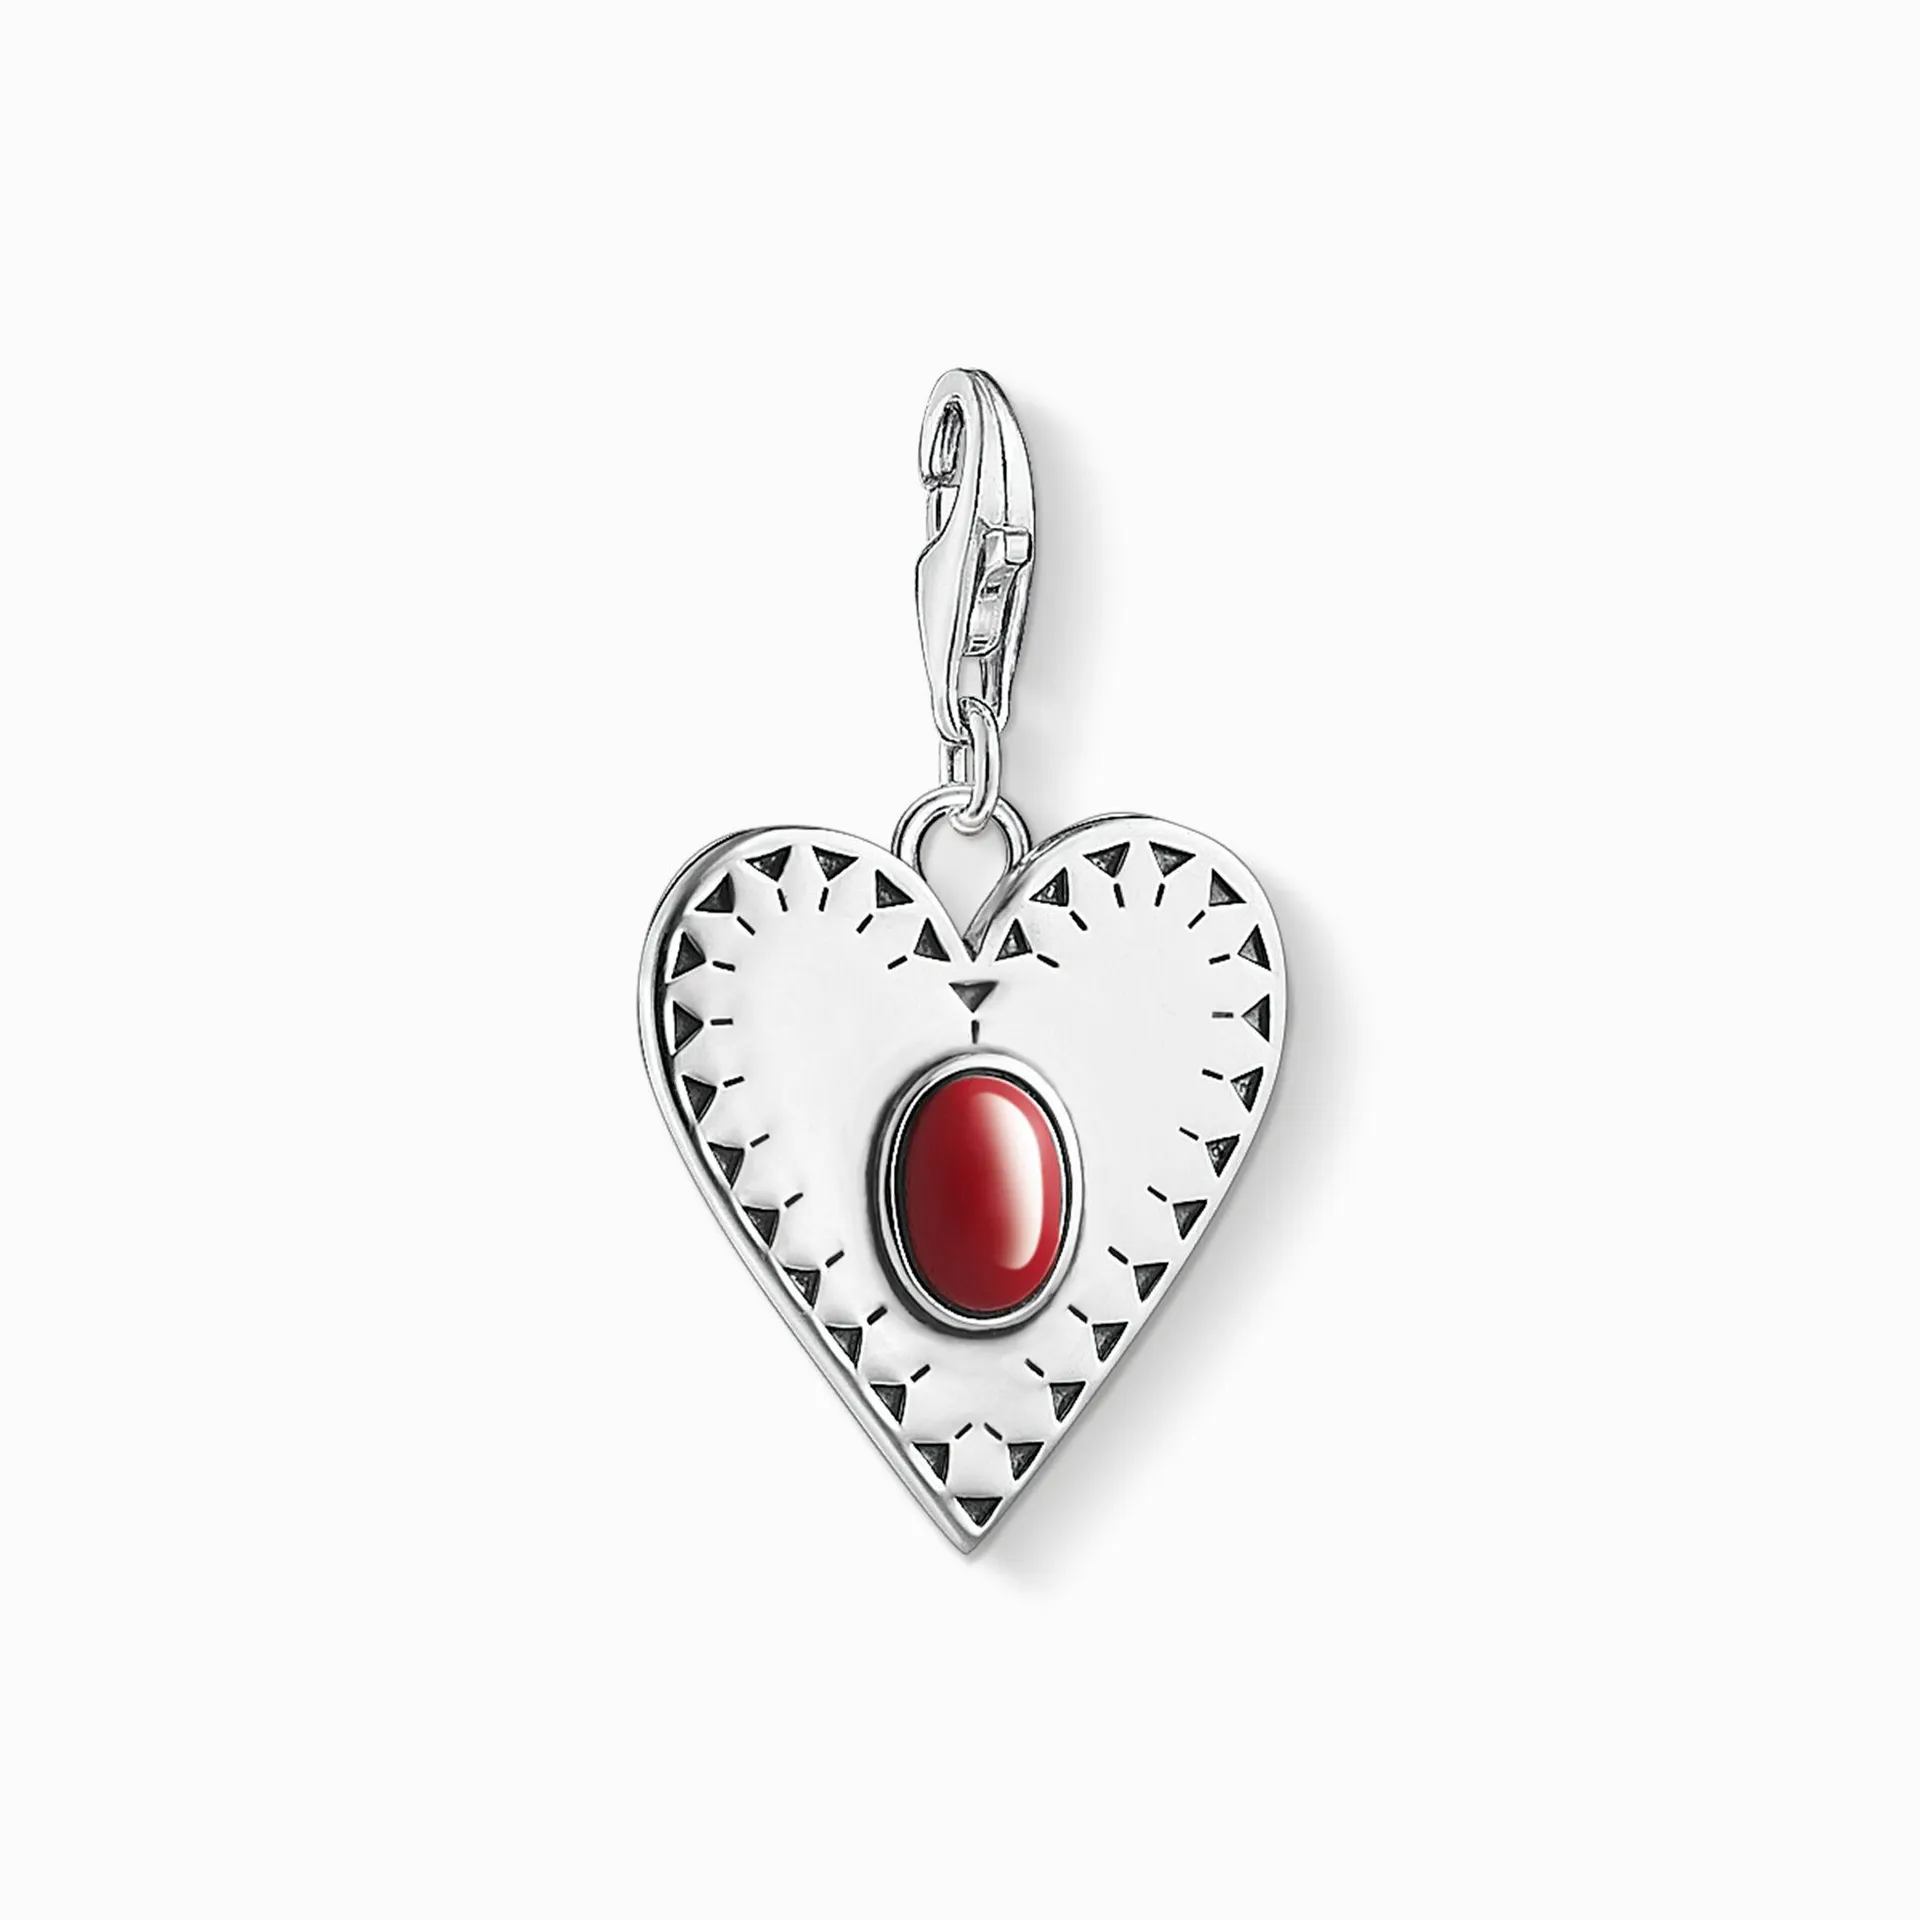 Charm pendant heart red stone